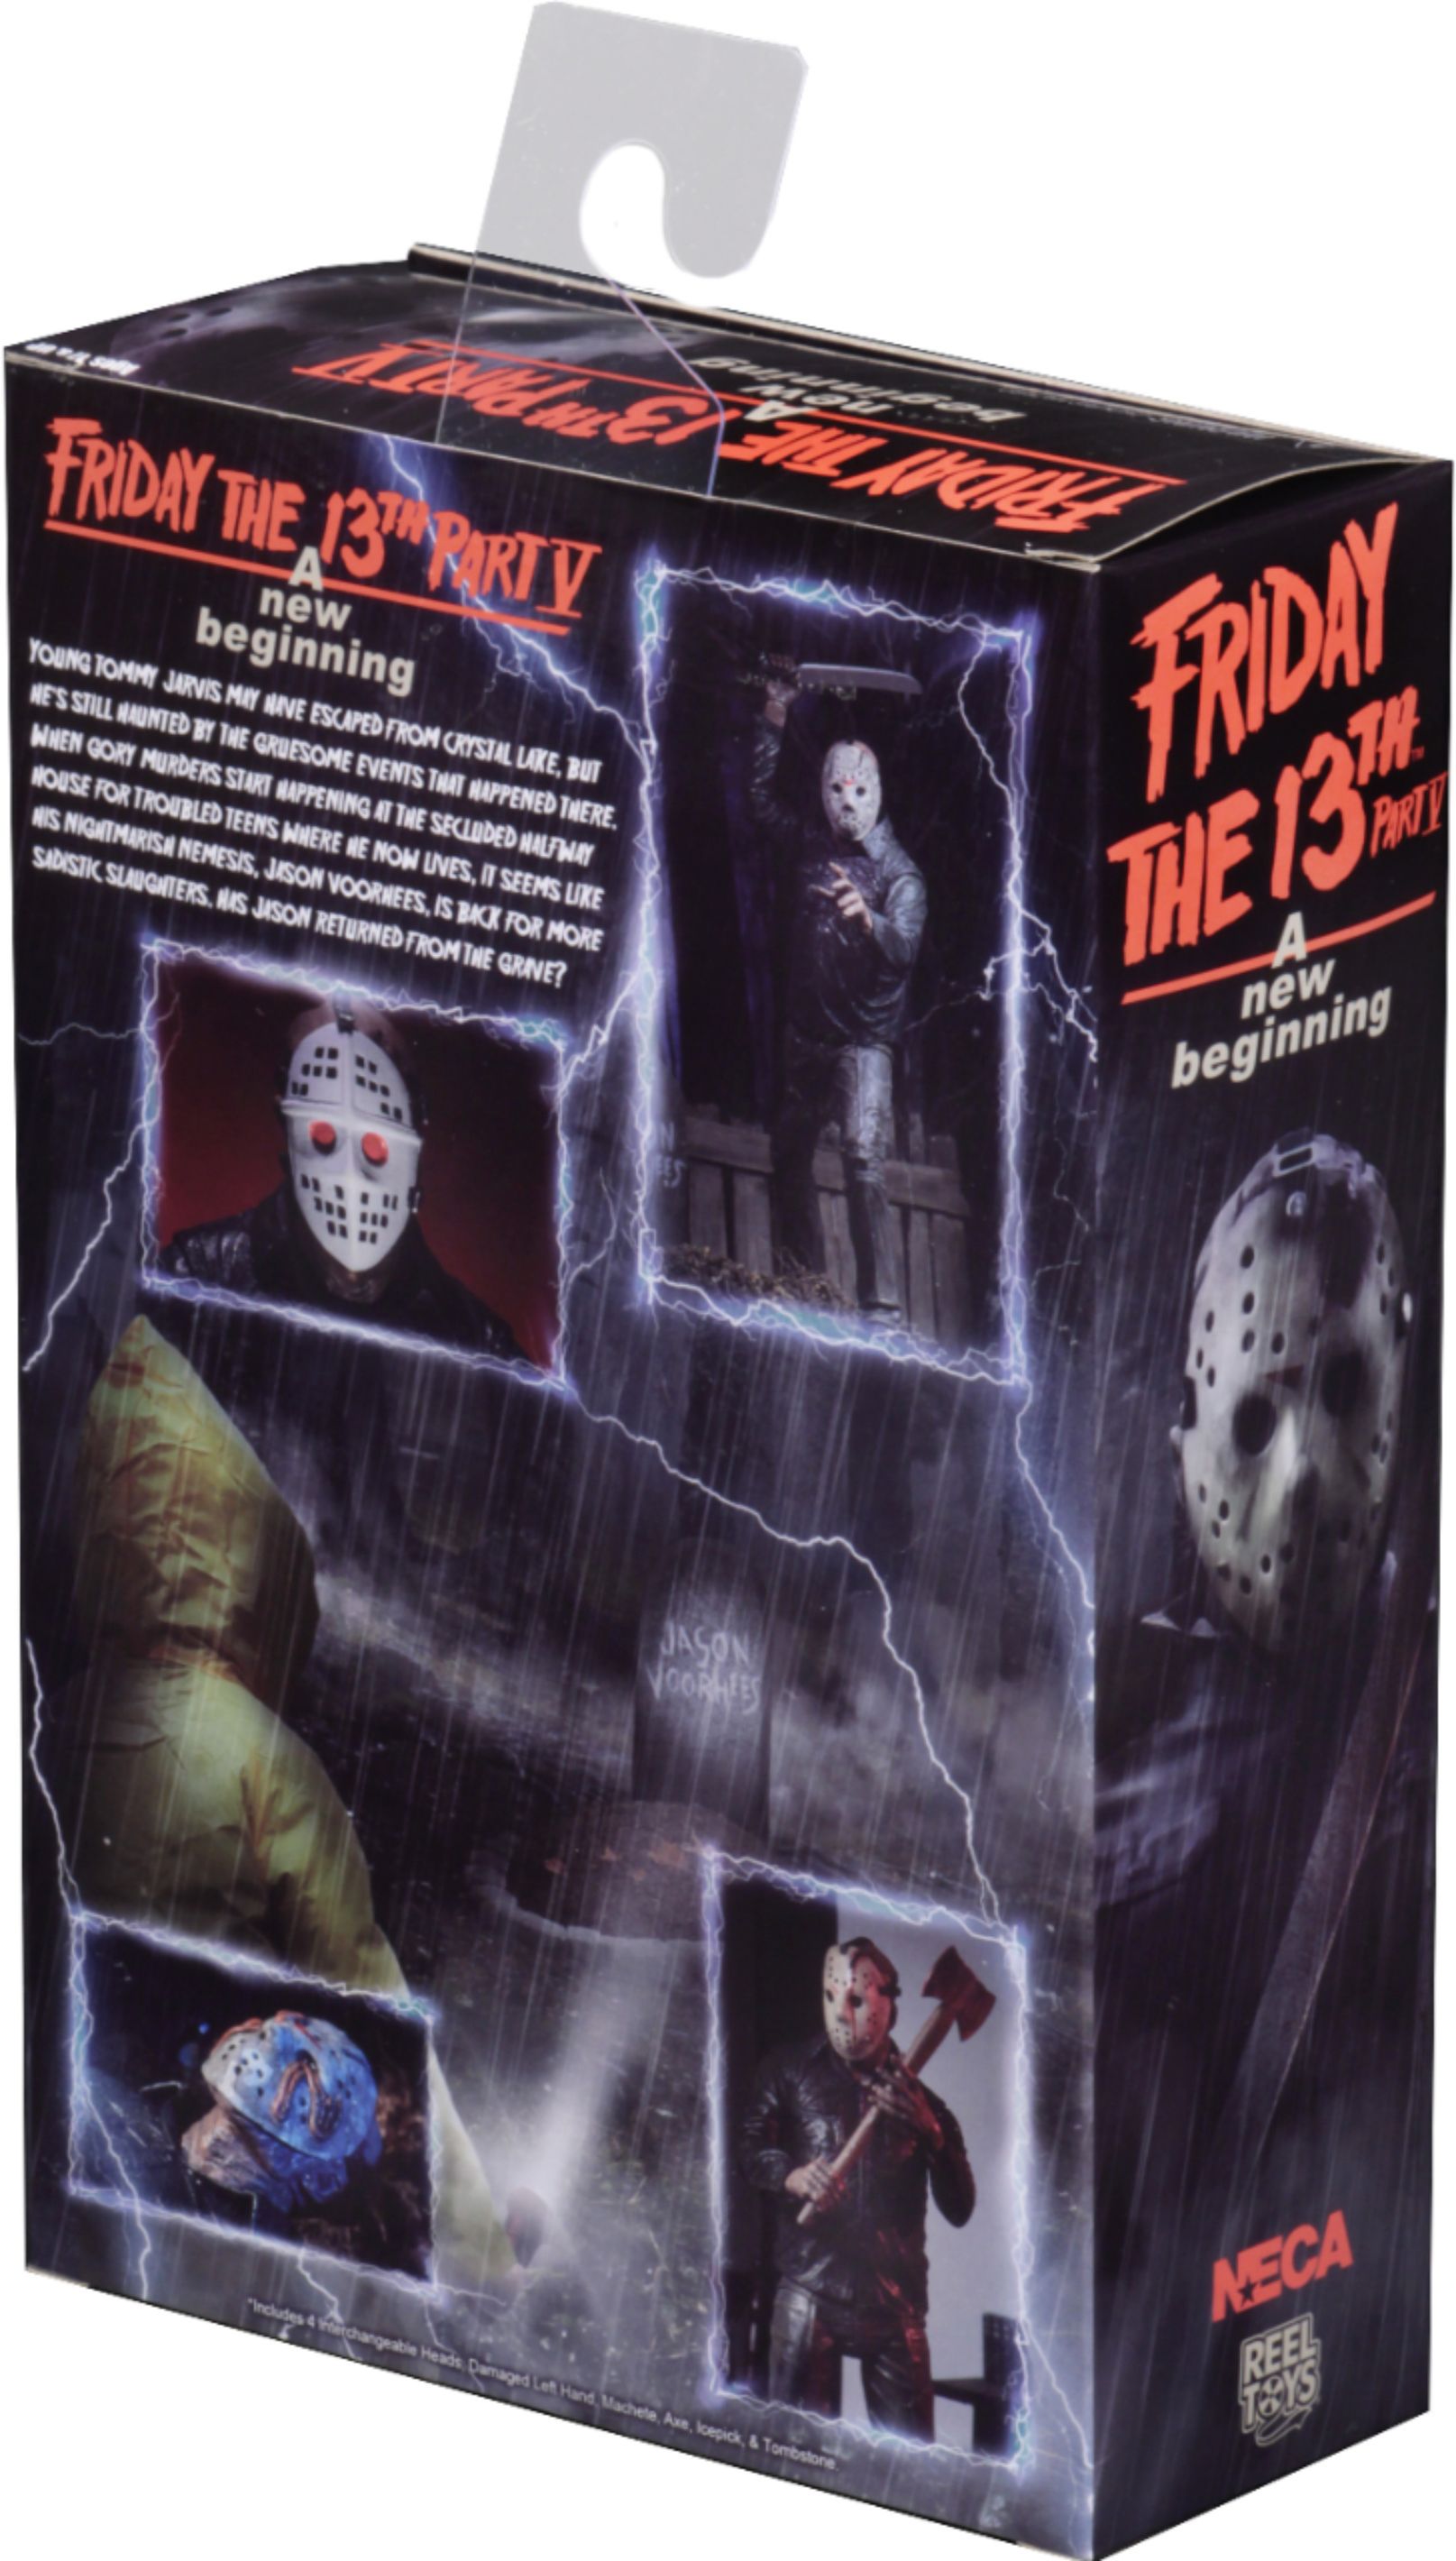 NECA Friday The 13th Part 5 New Beginning JASON VOORHEES Ultimate 7” Figure 